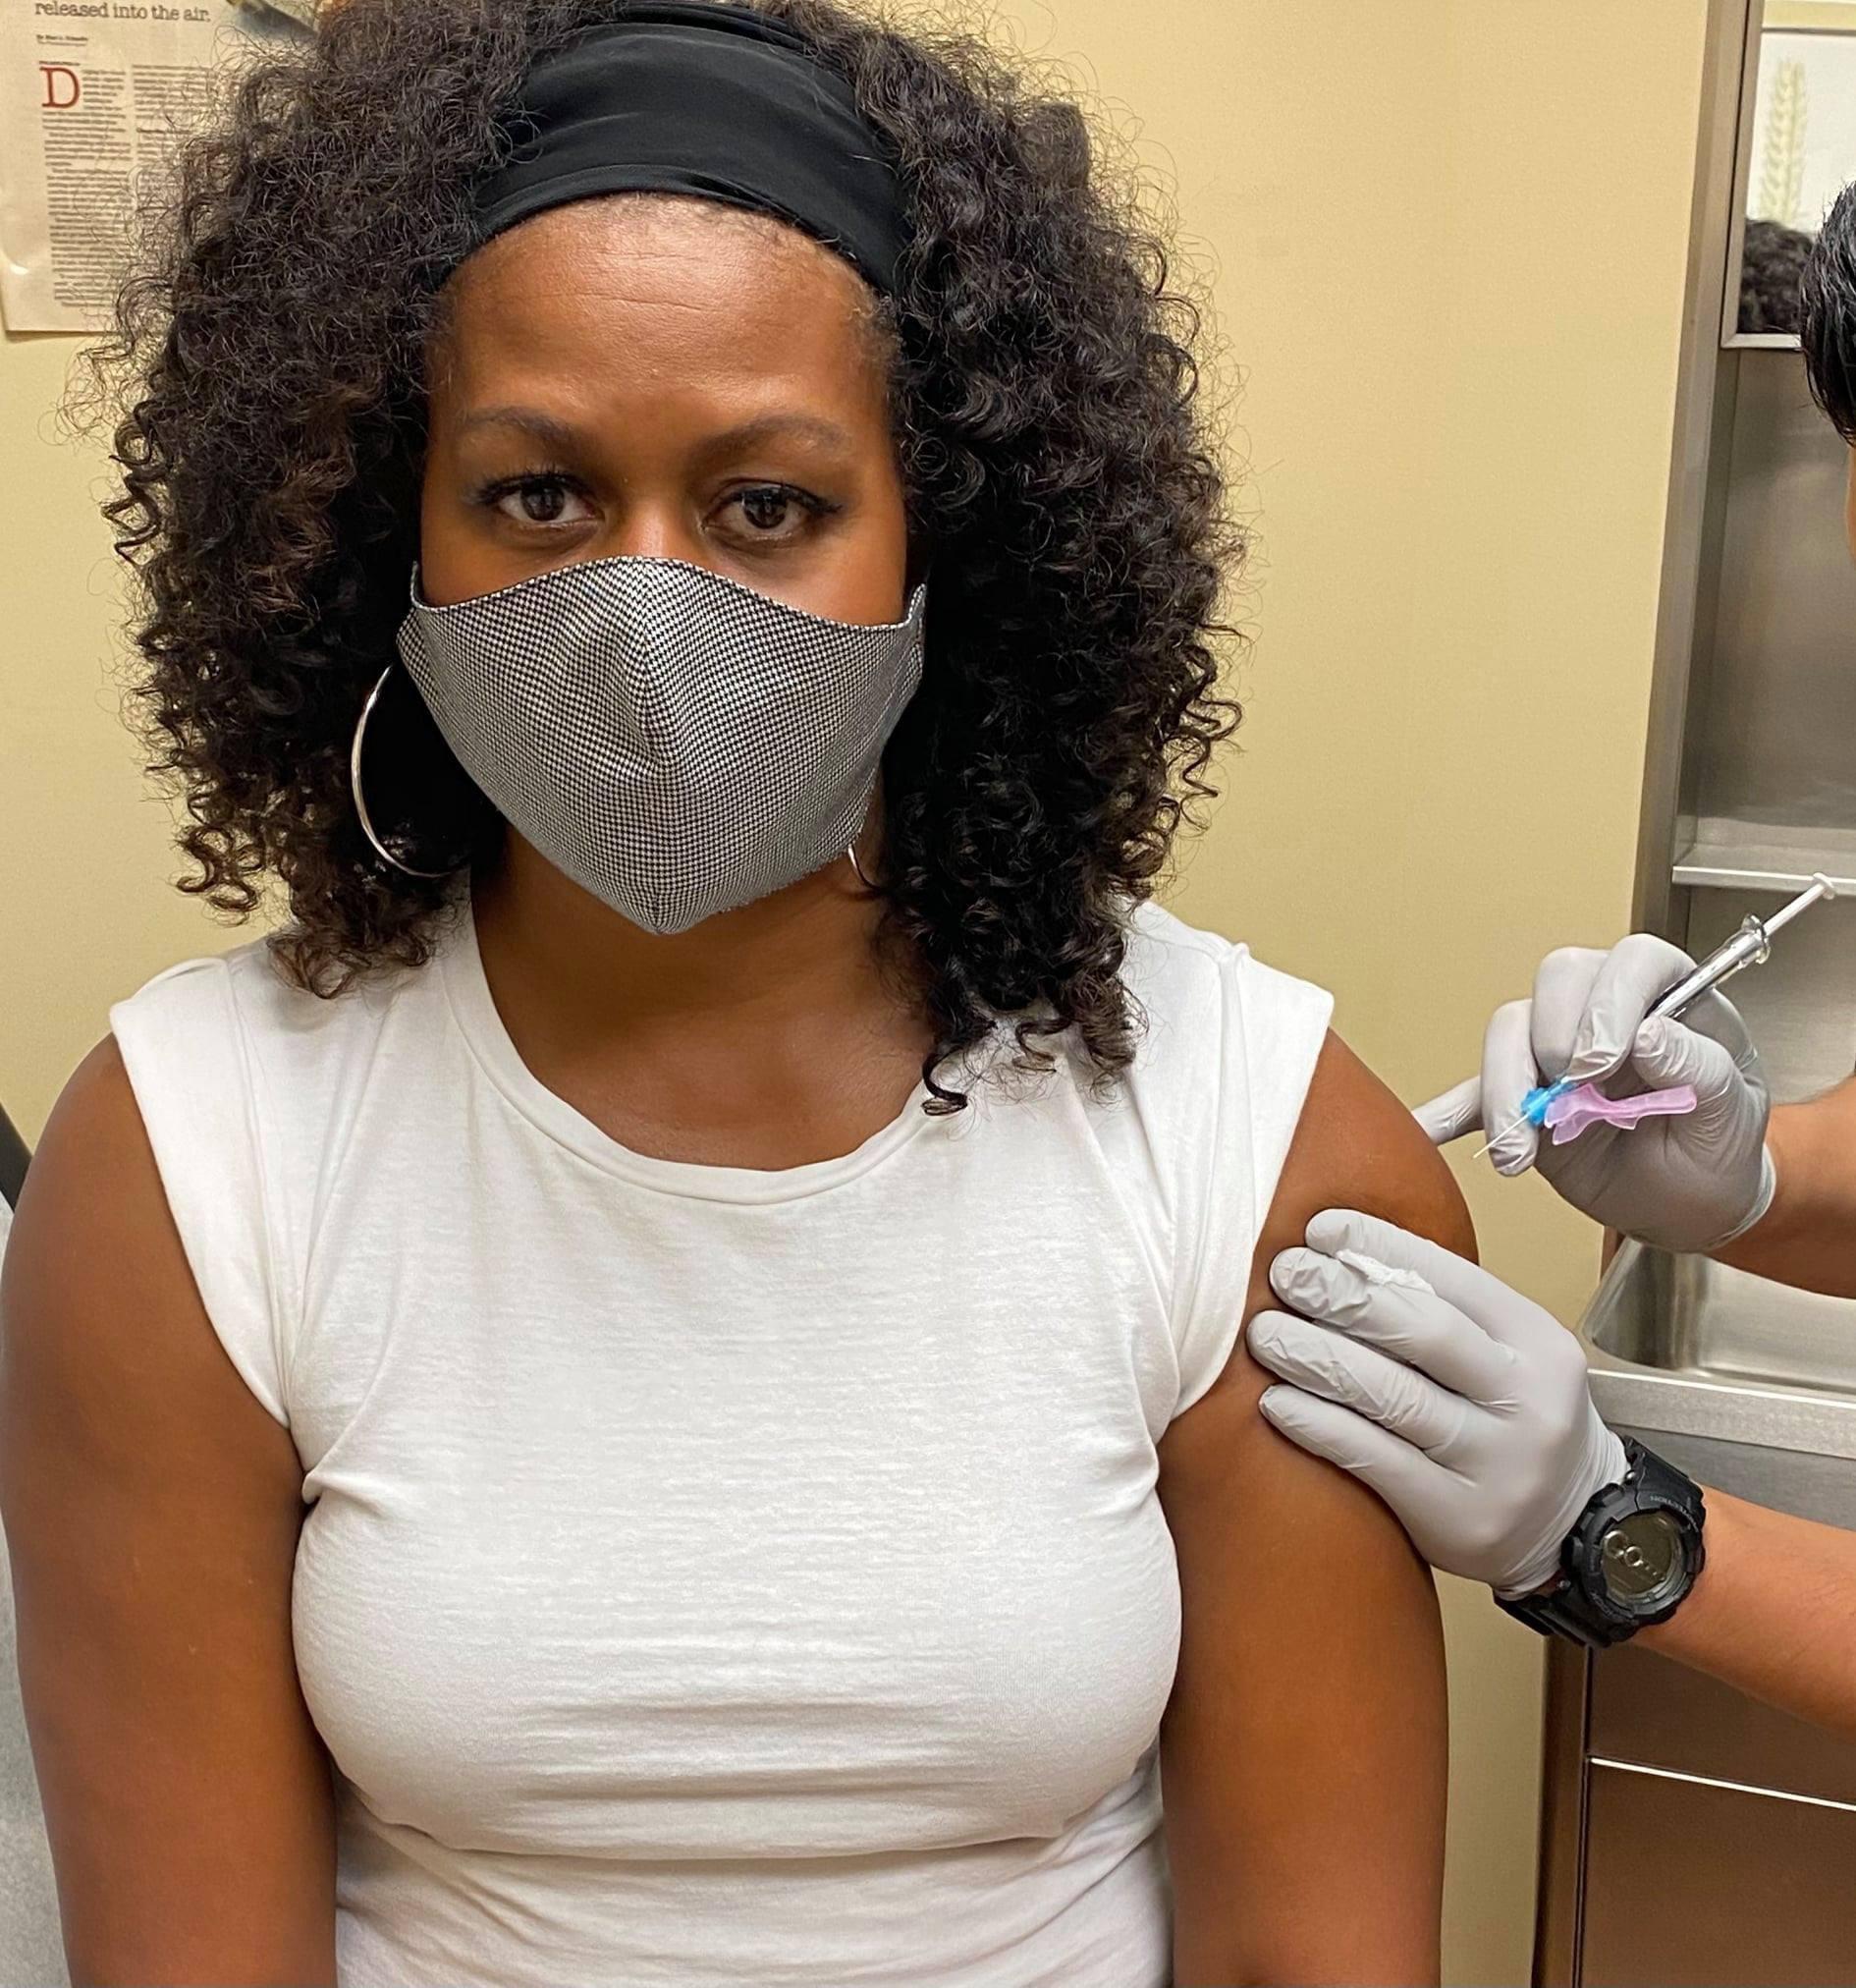 Michelle Obama is not entertained getting vaccinated against the Coronavirus